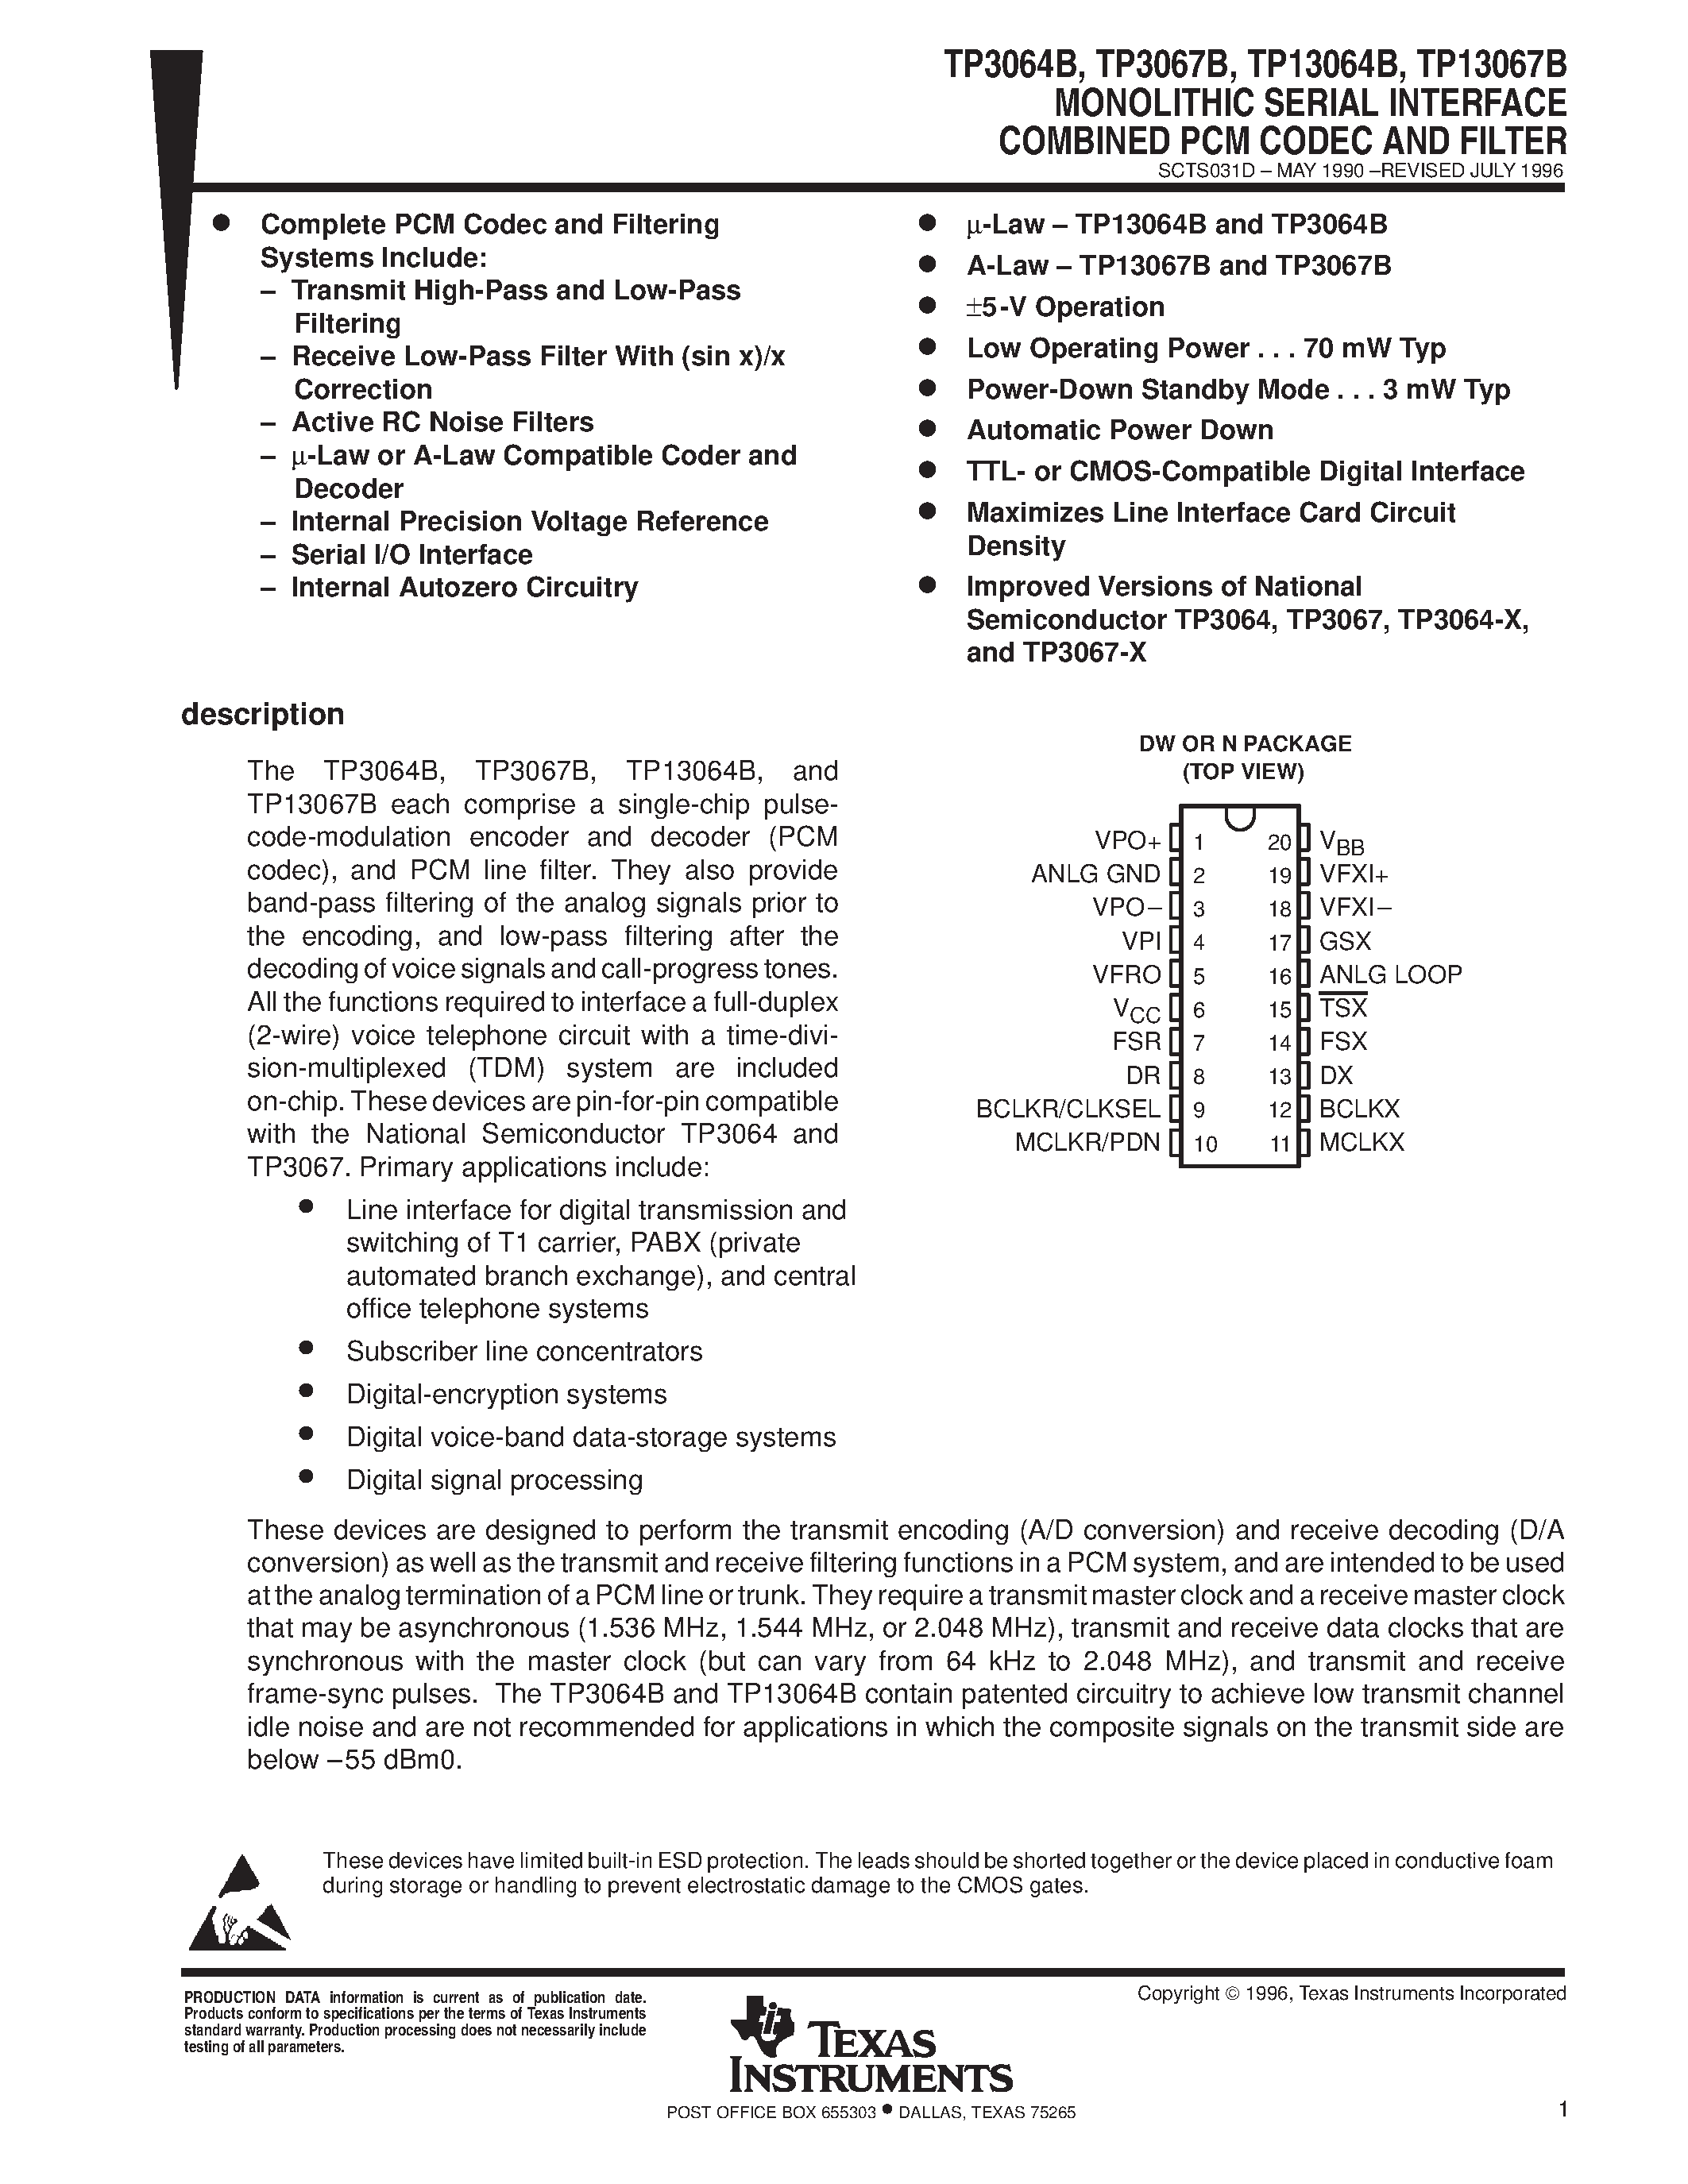 Datasheet TP13064B - MONOLITHIC SERIAL INTERFACE COMBINED PCM CODEC AND FILTER page 1